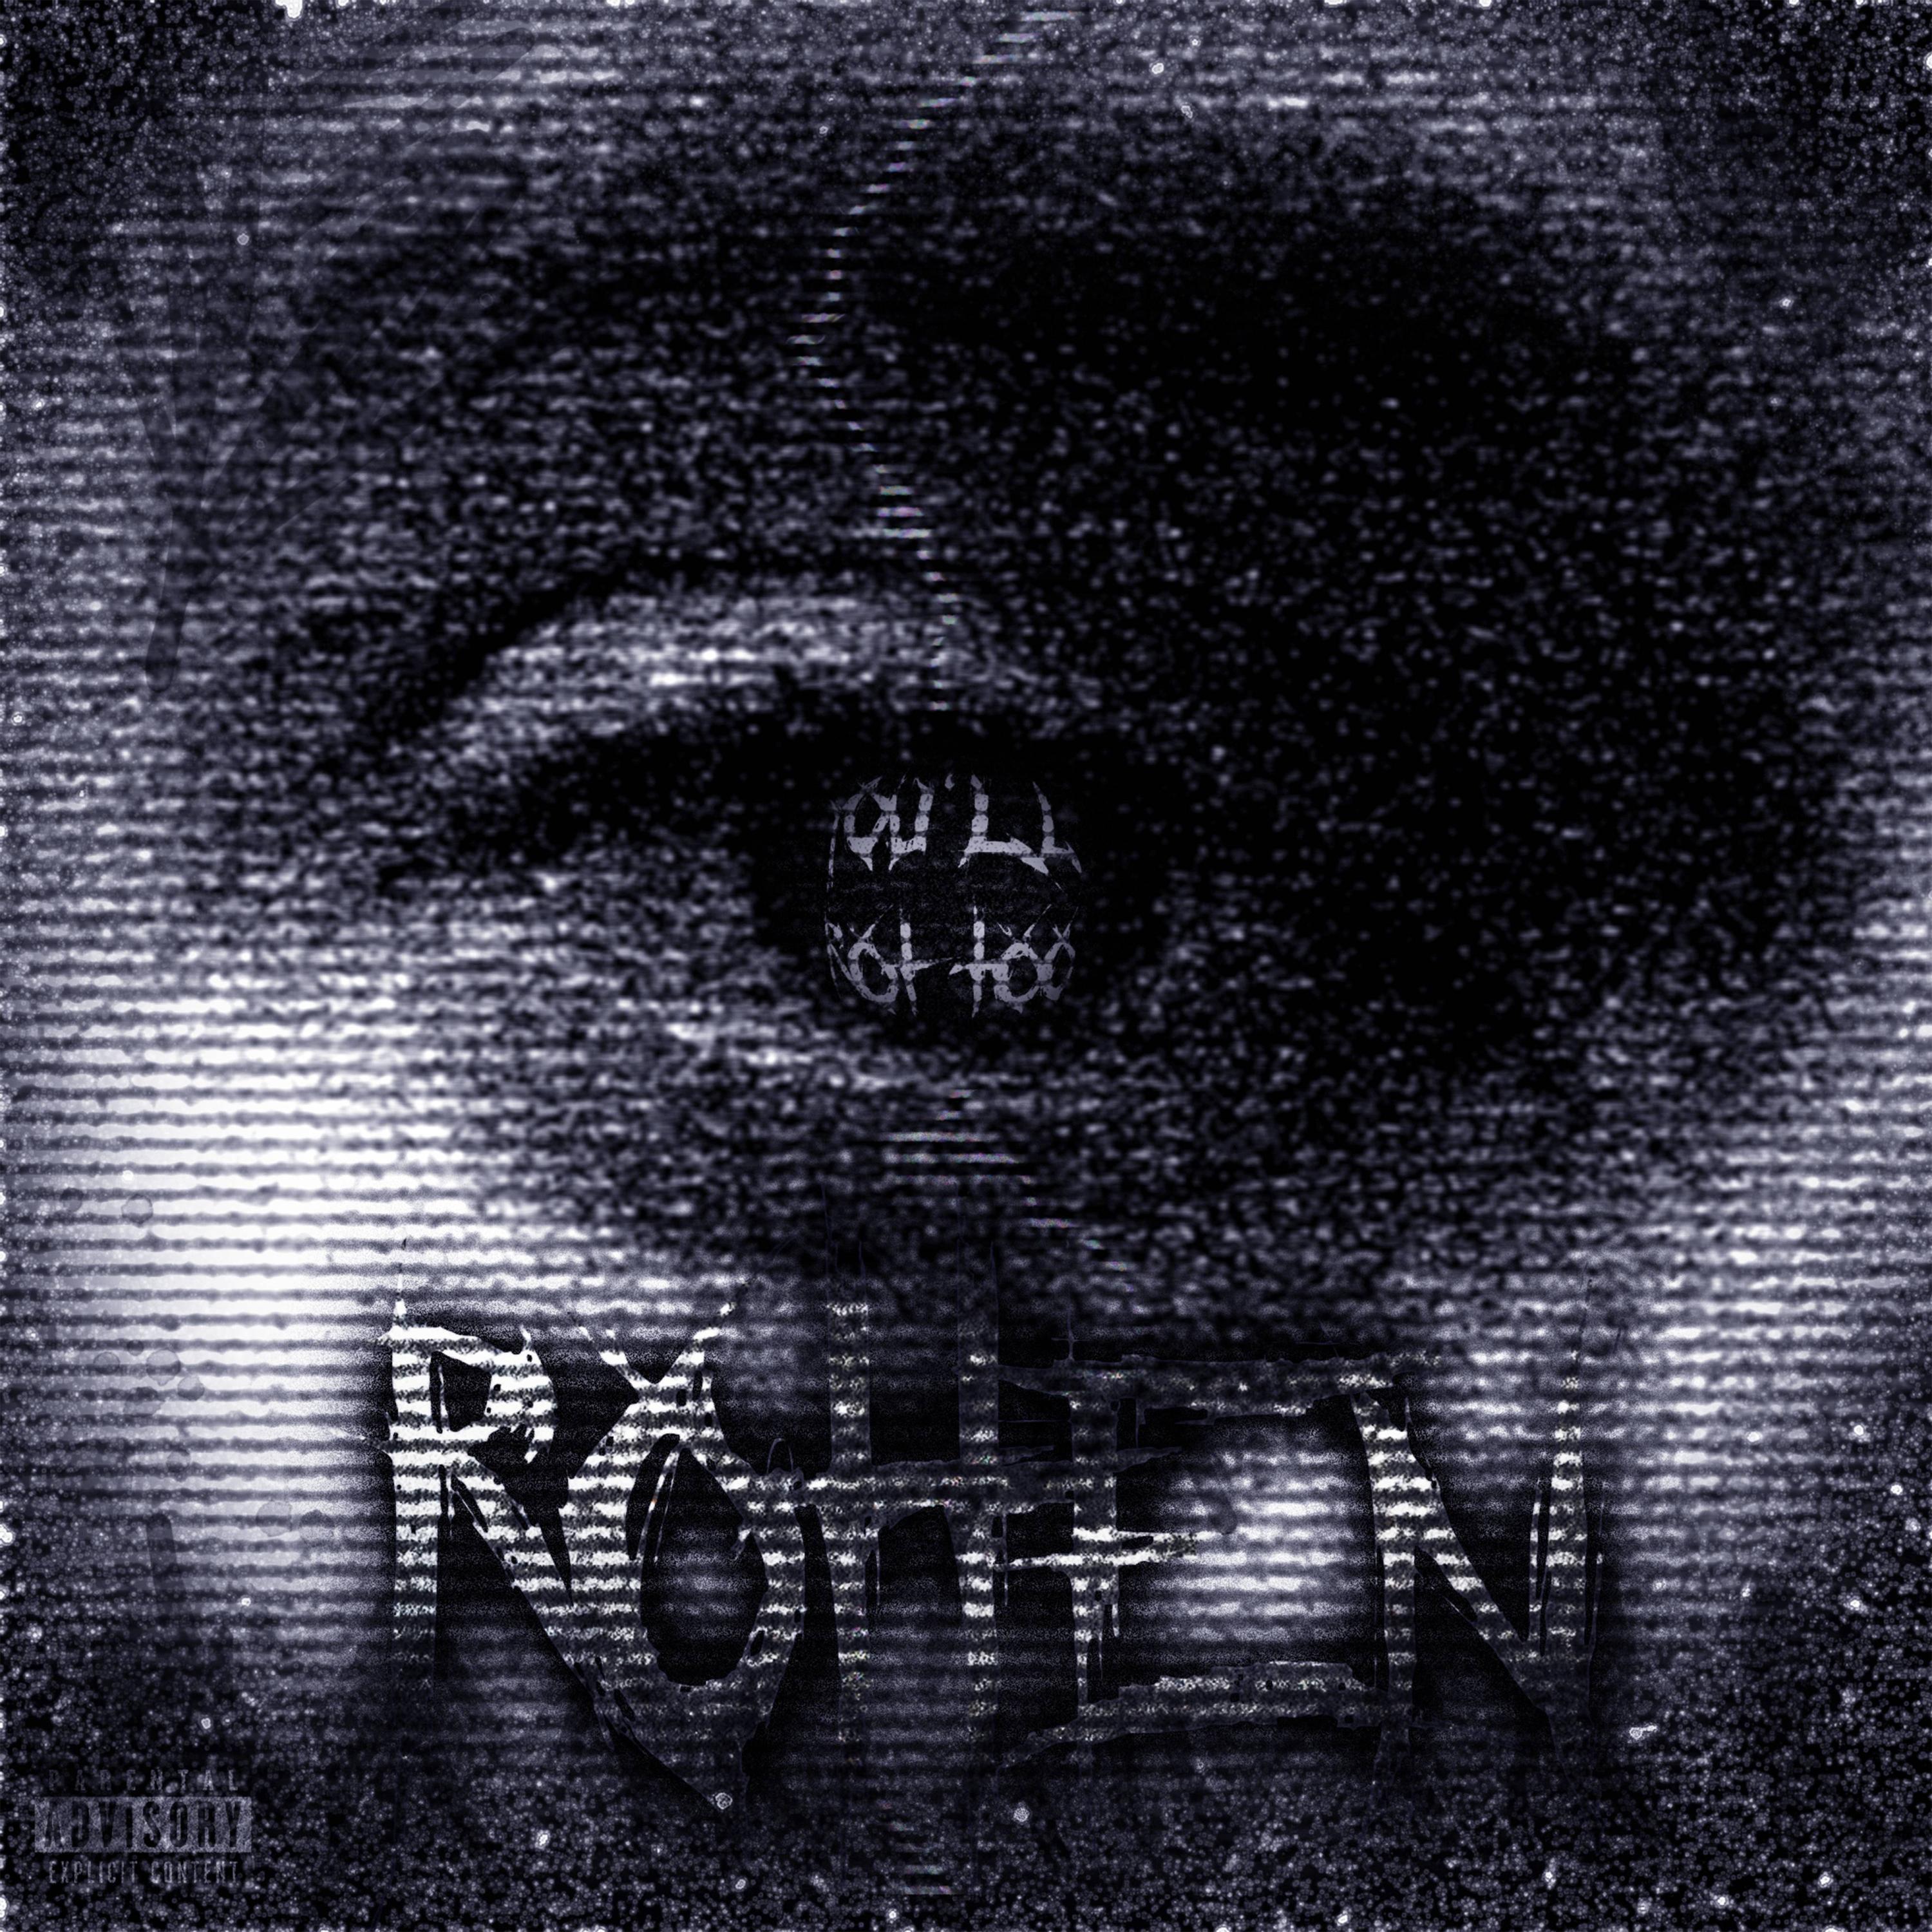 Rotten - Out the mud